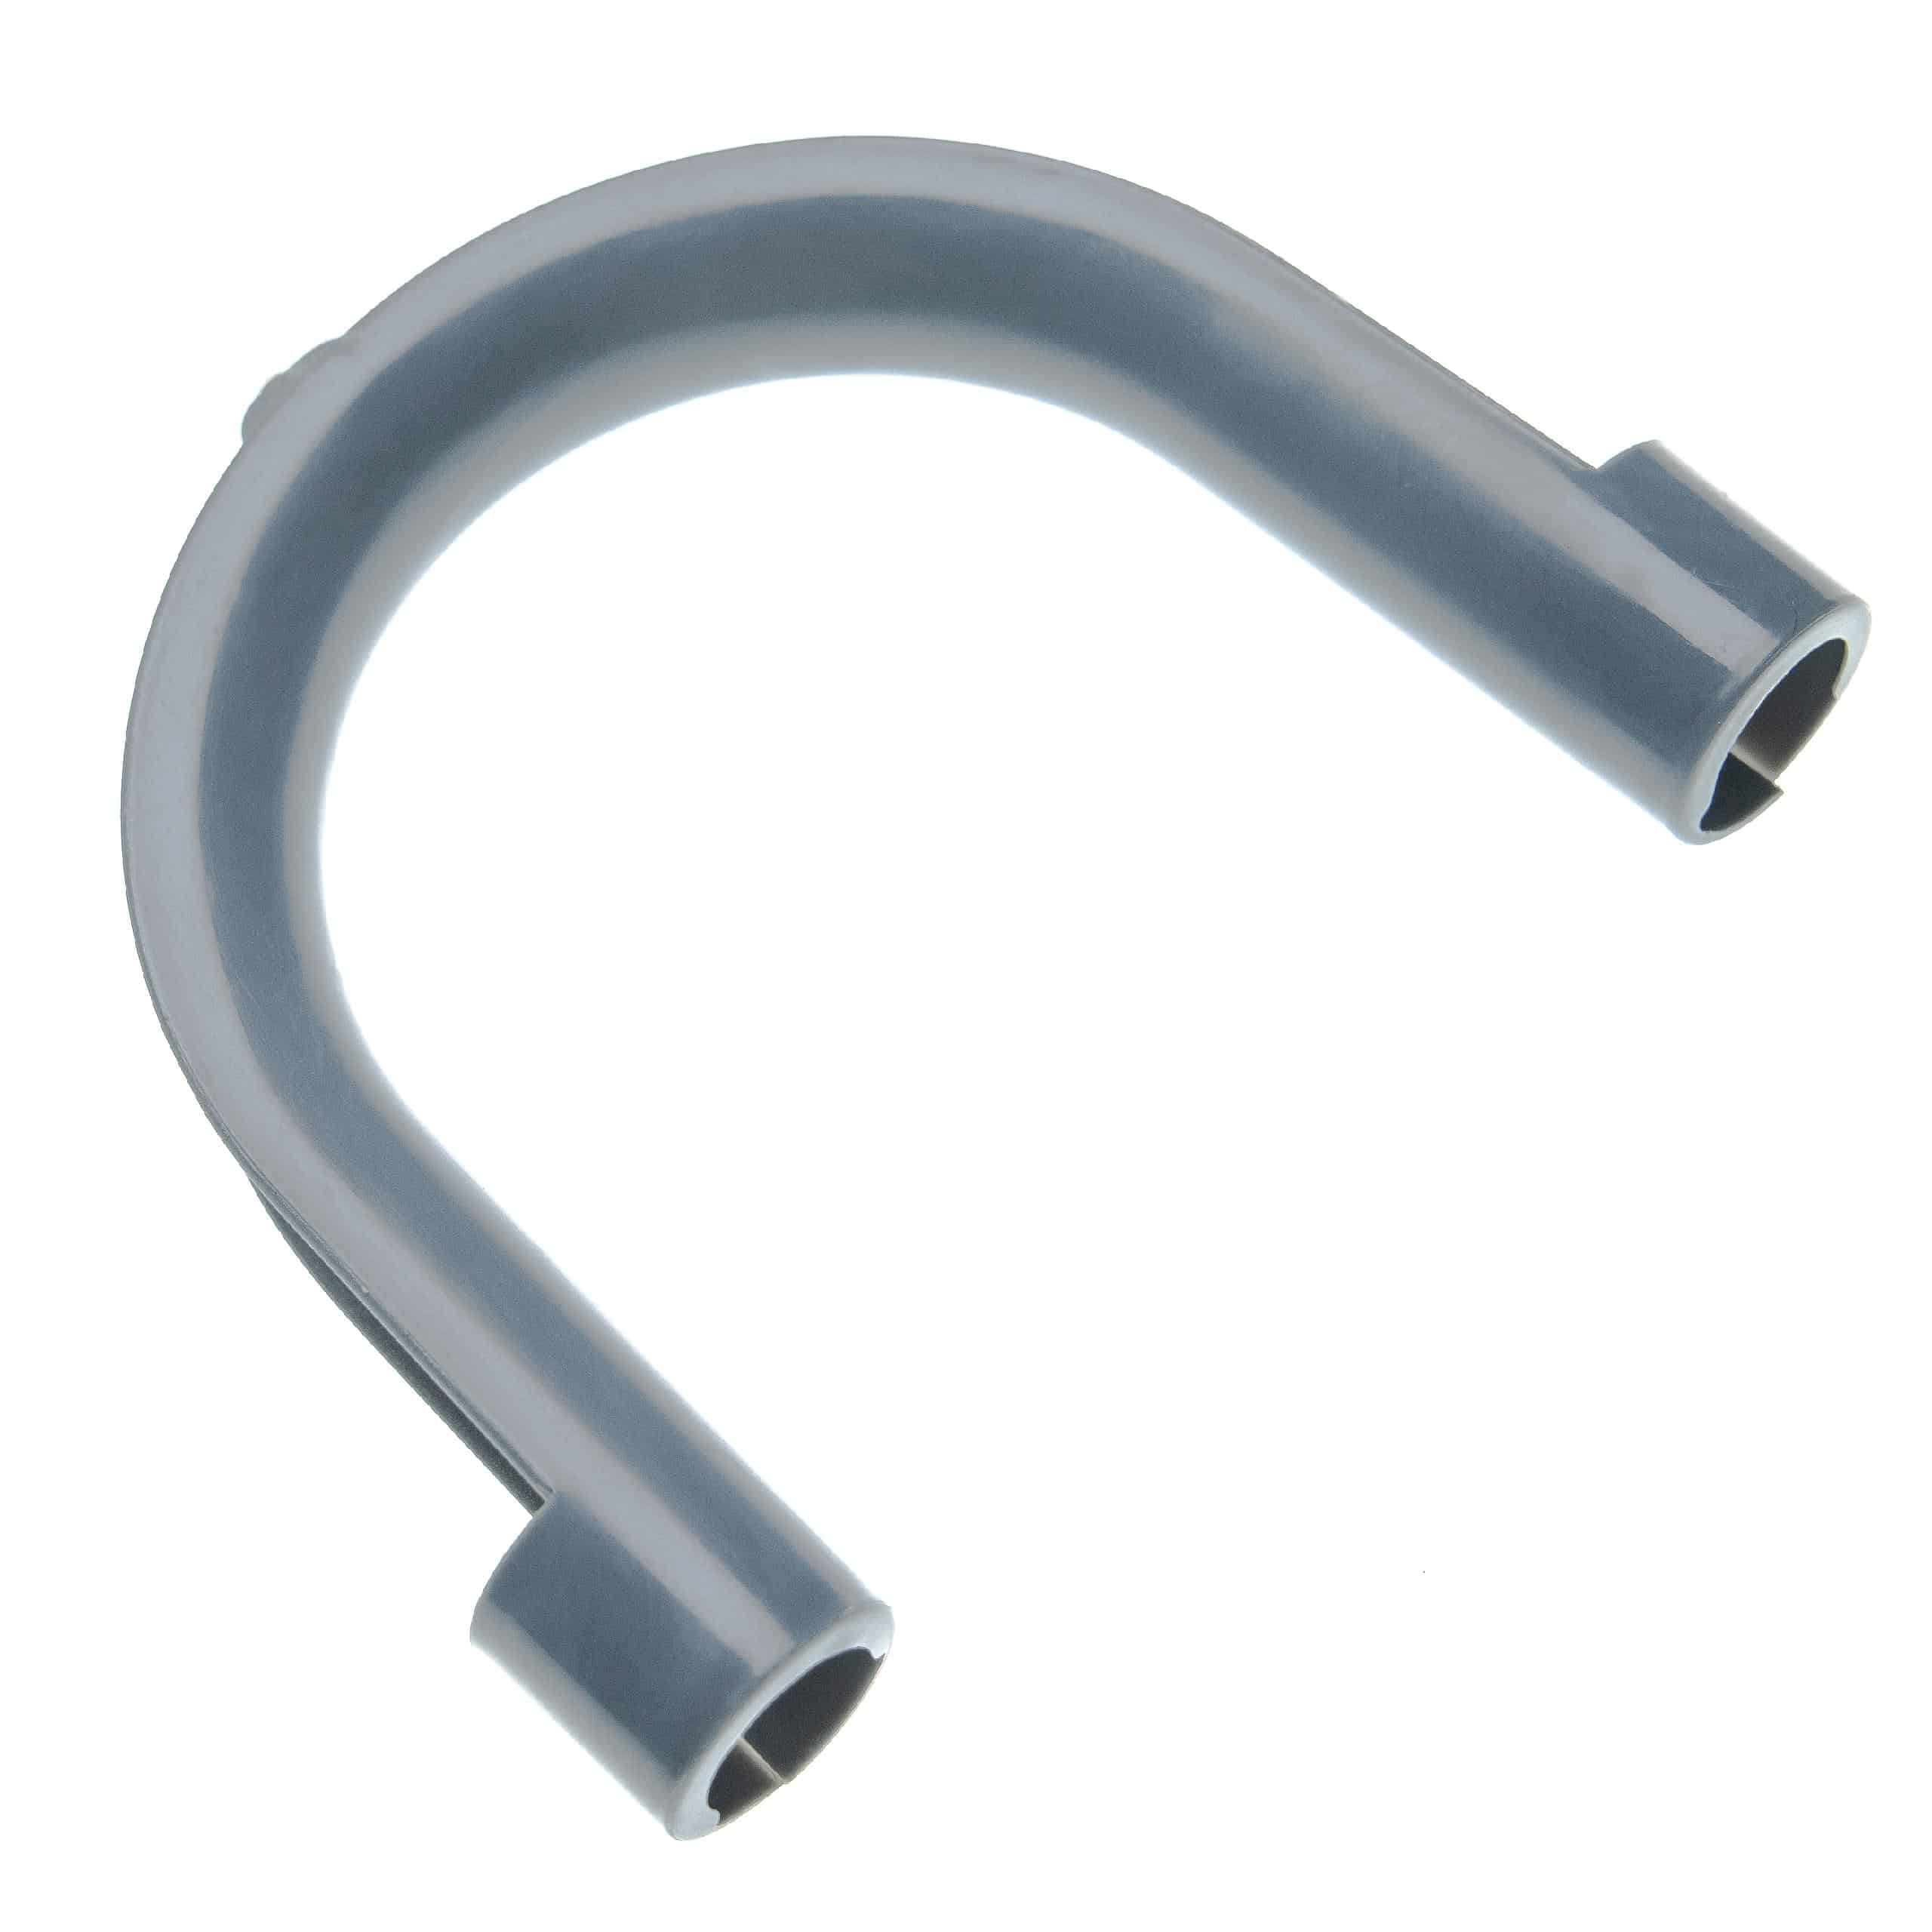 Drain Hose compatible with most Washing Machines - 22/29mm Straight Connection, Grey